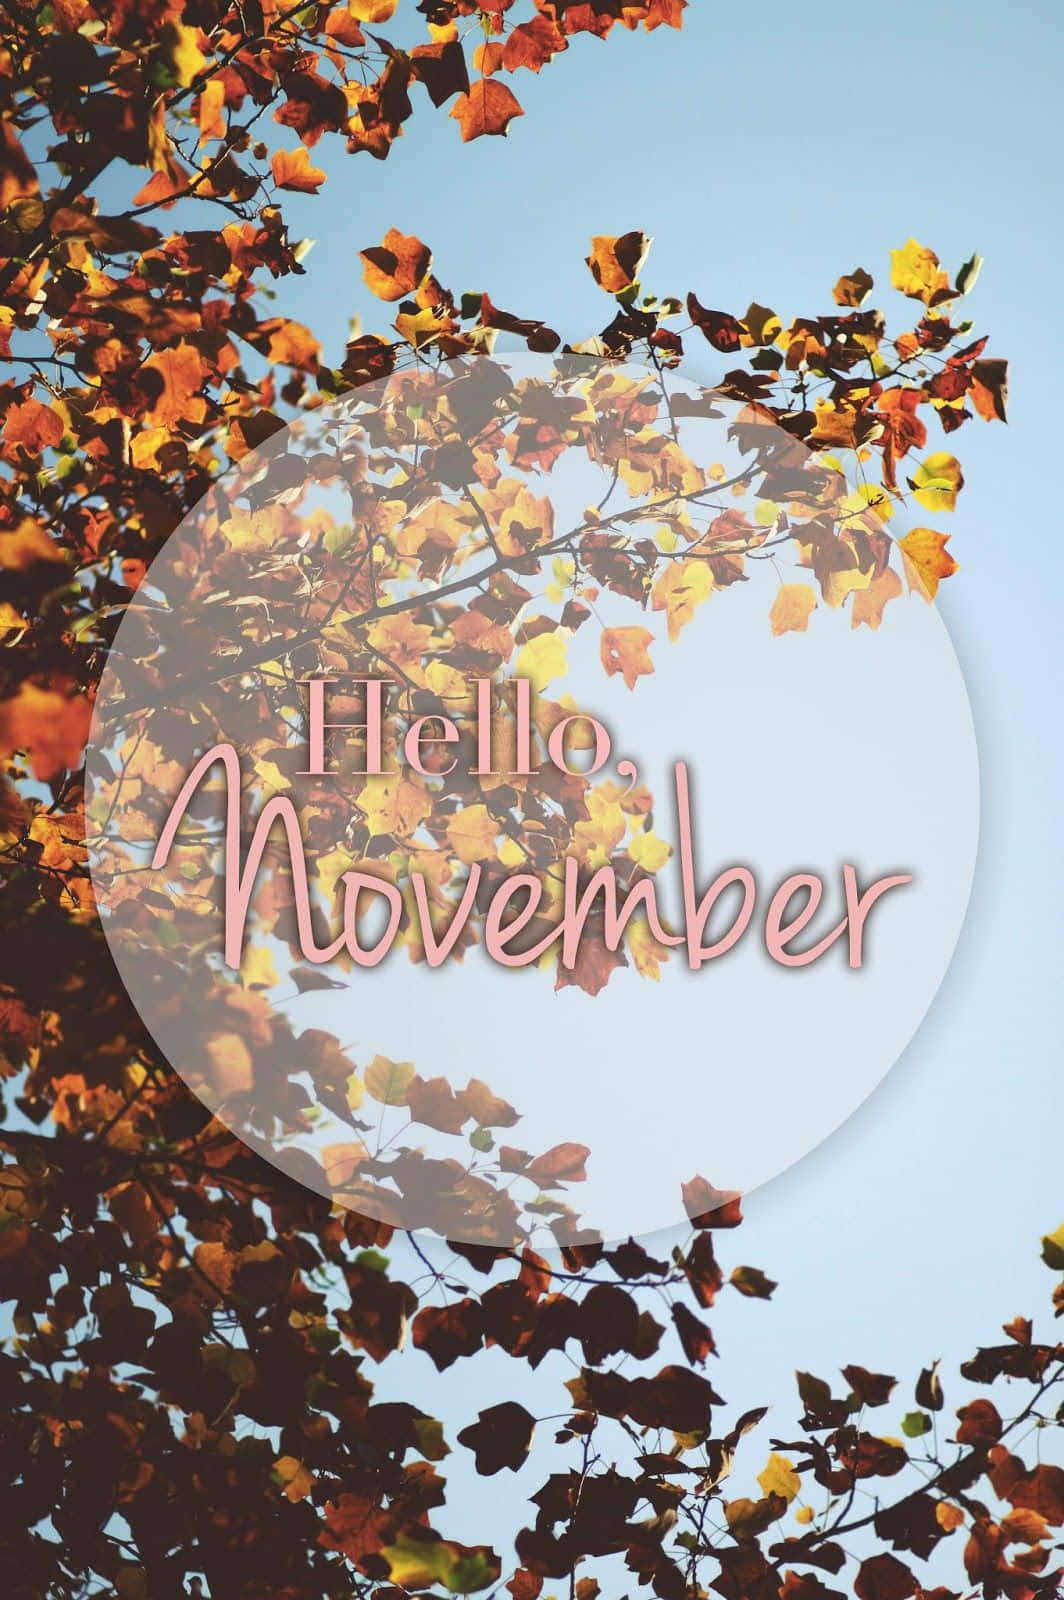 Cuddle up close and enjoy the warm cozy vibes of November Wallpaper